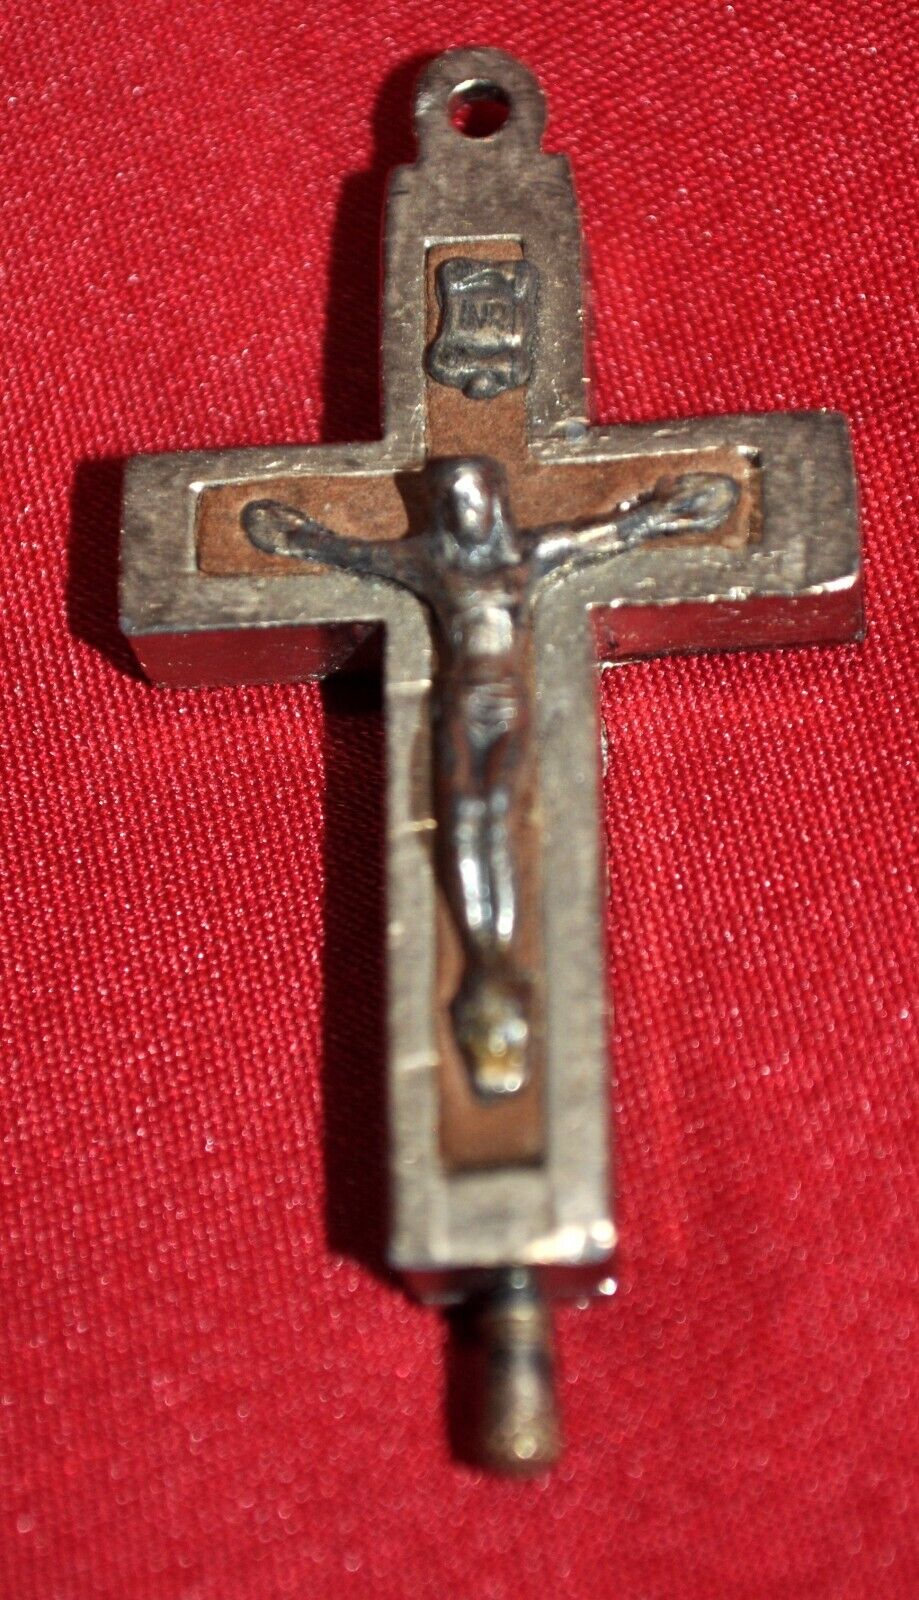 VTG HINGED RELIQUARY INLAID WOOD CRUCIFIX, ITALY, W SOIL FROM ROME CATACOMBS